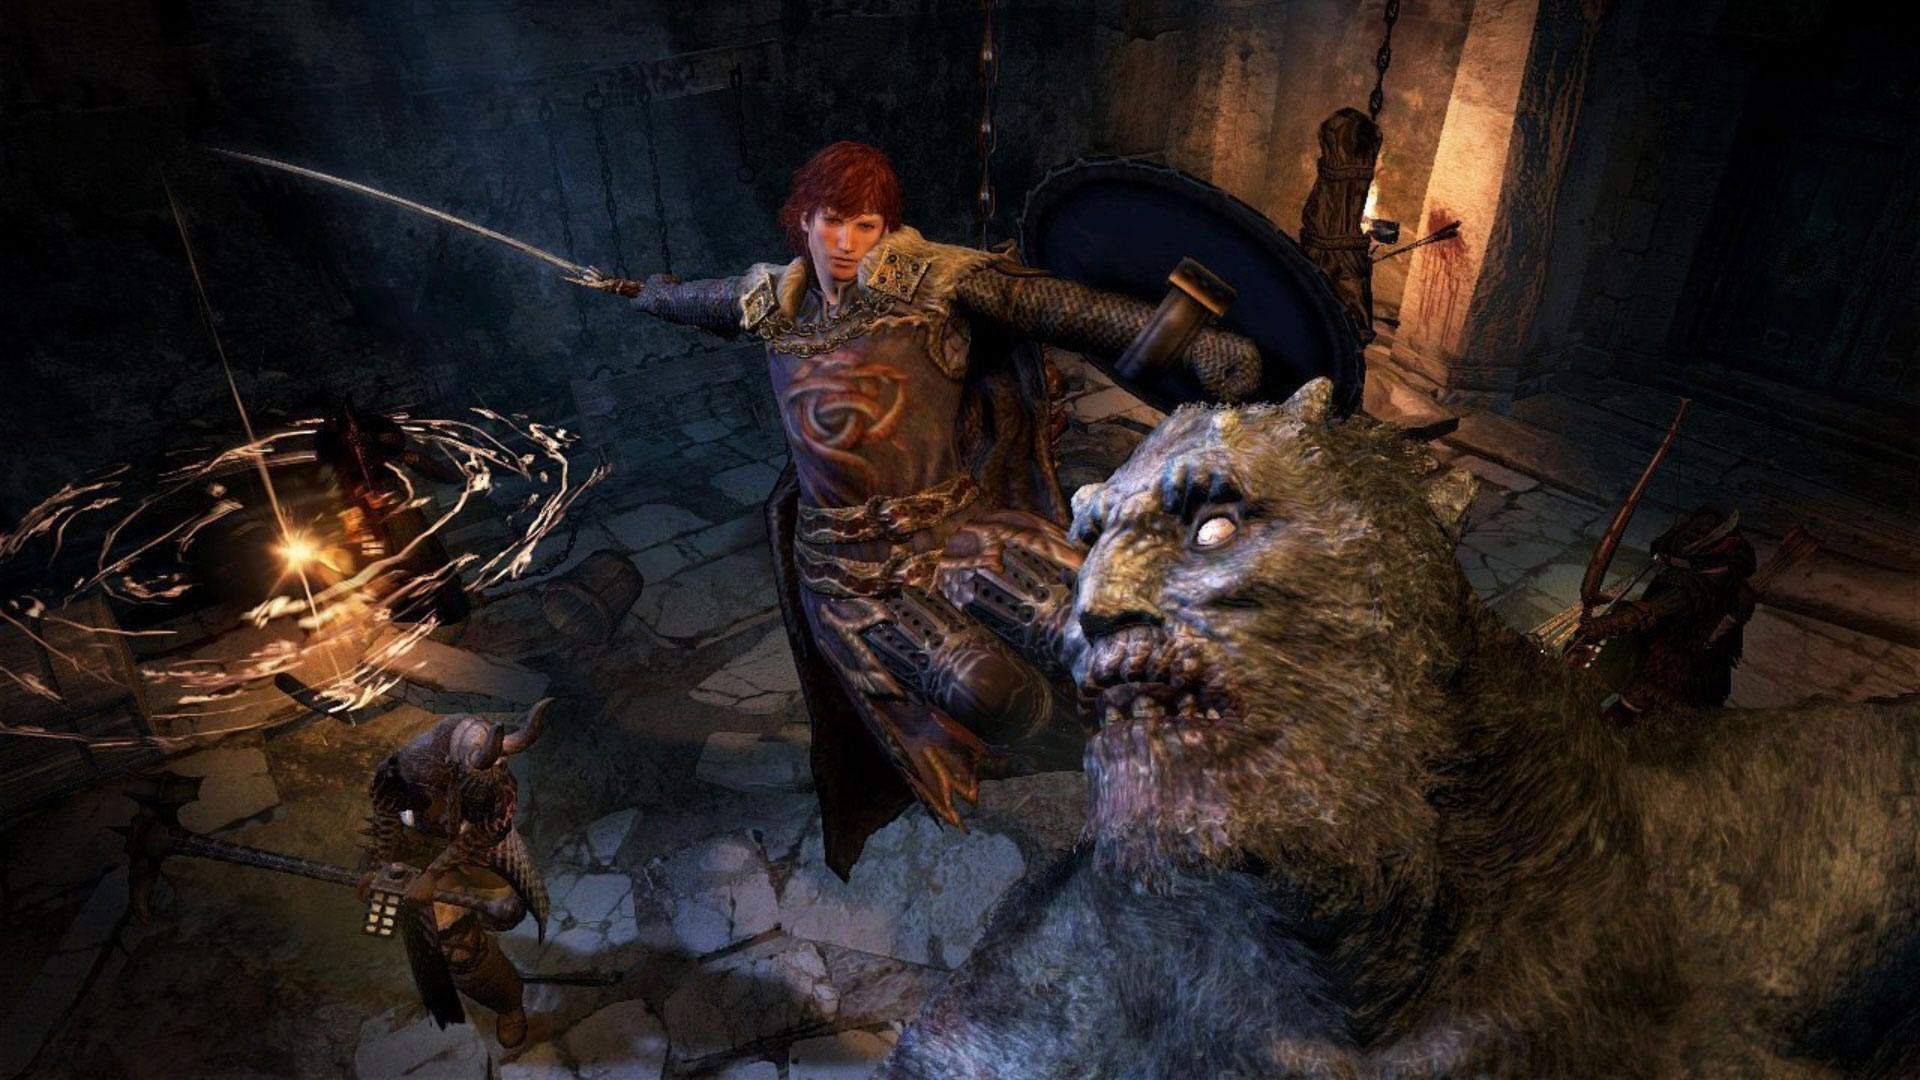 Dragon's Dogma 2 Release Date Has Appeared On Steam